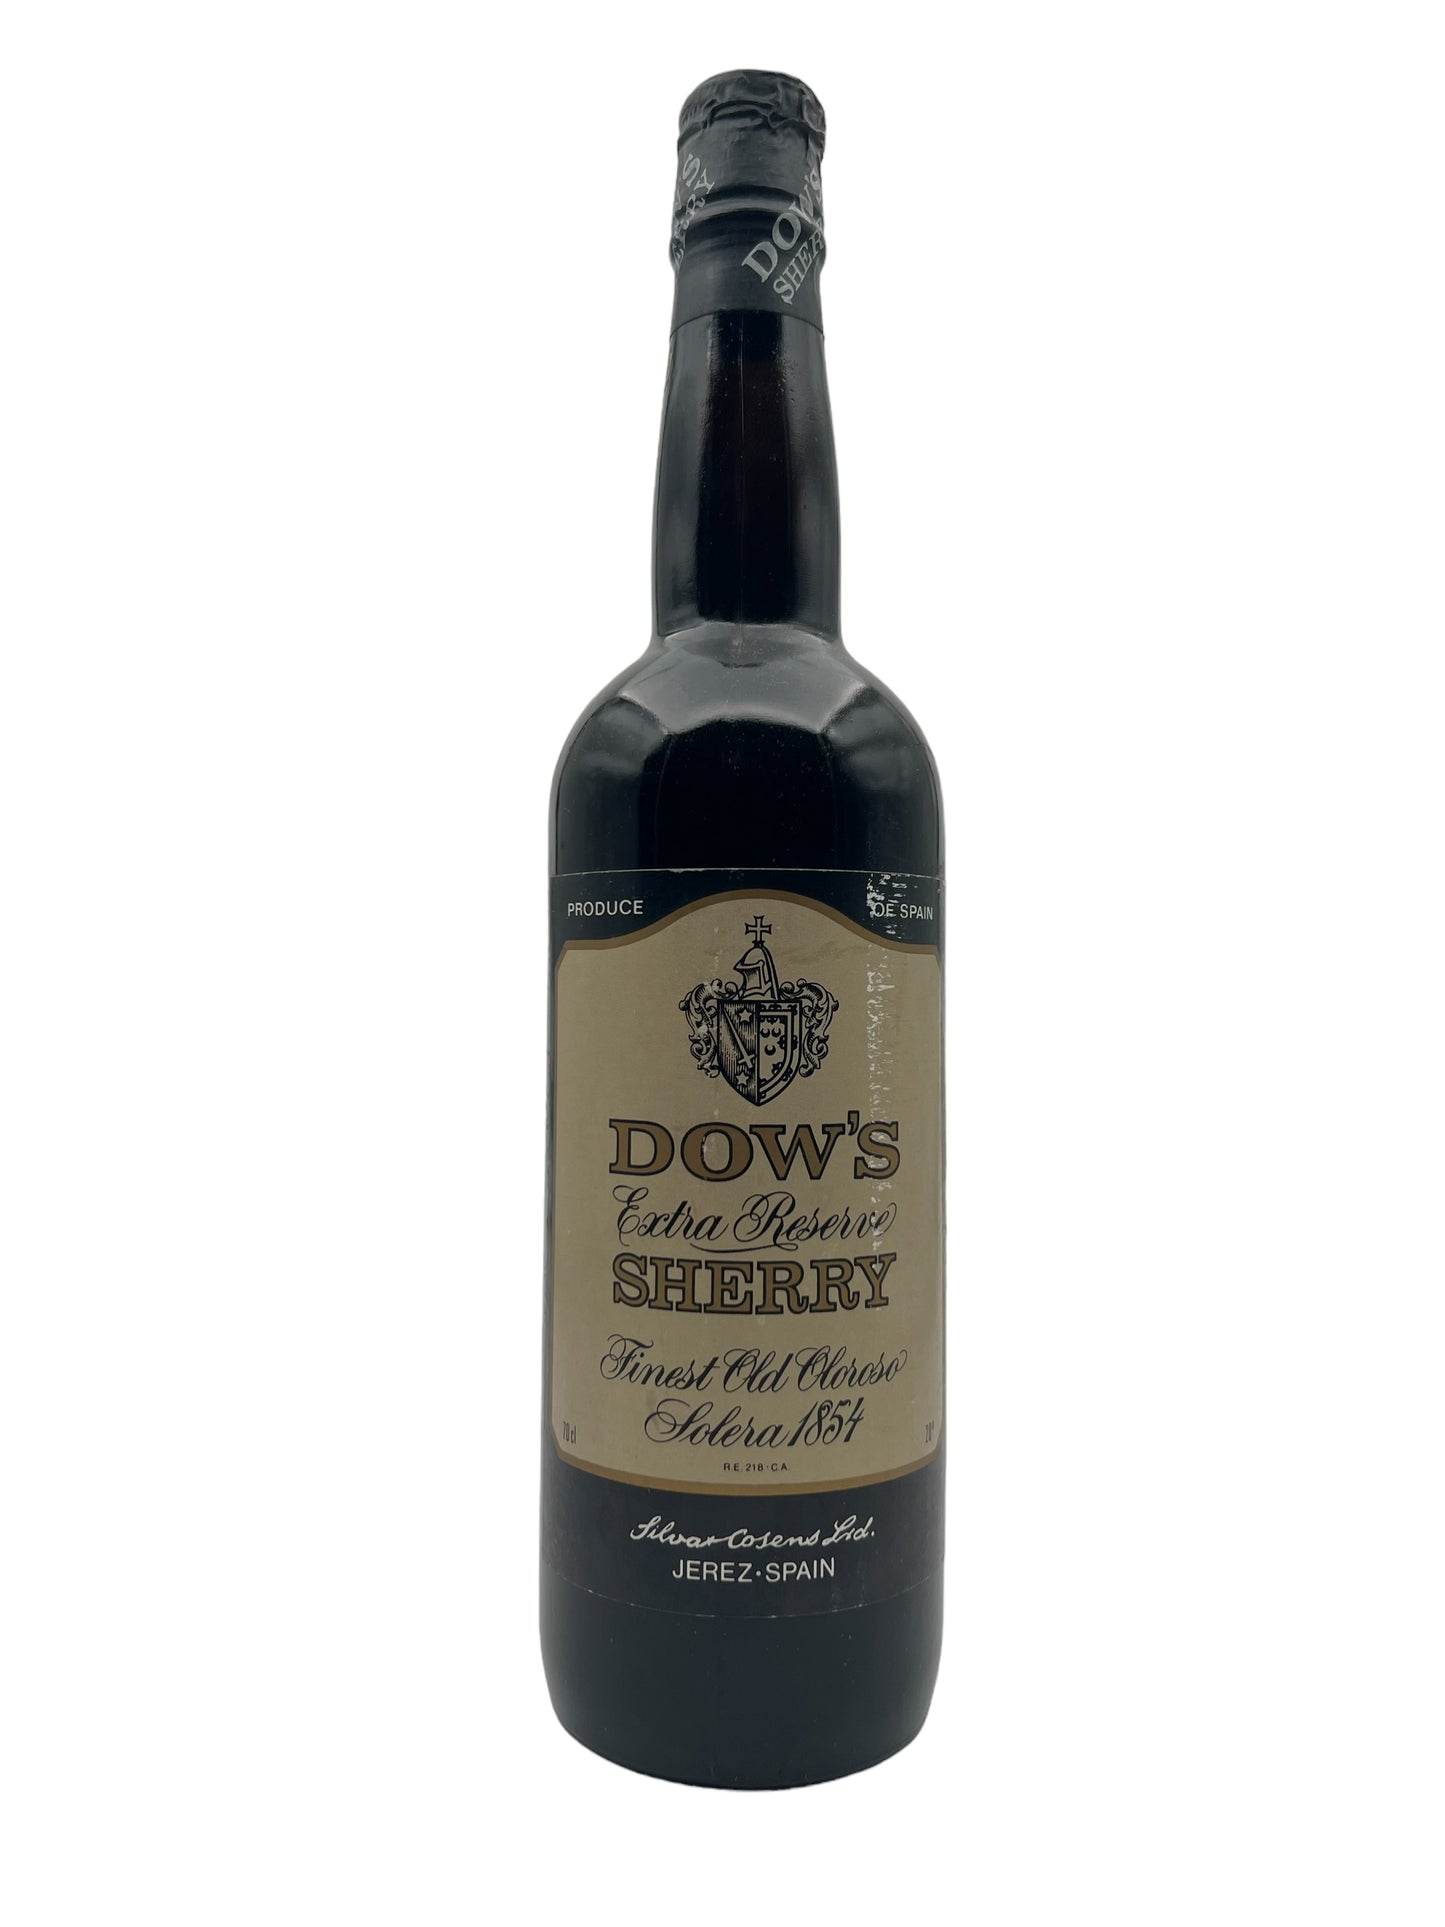 Sherry NV DOW'S SHERRY EXTRA RESERVE SOLERA 1854